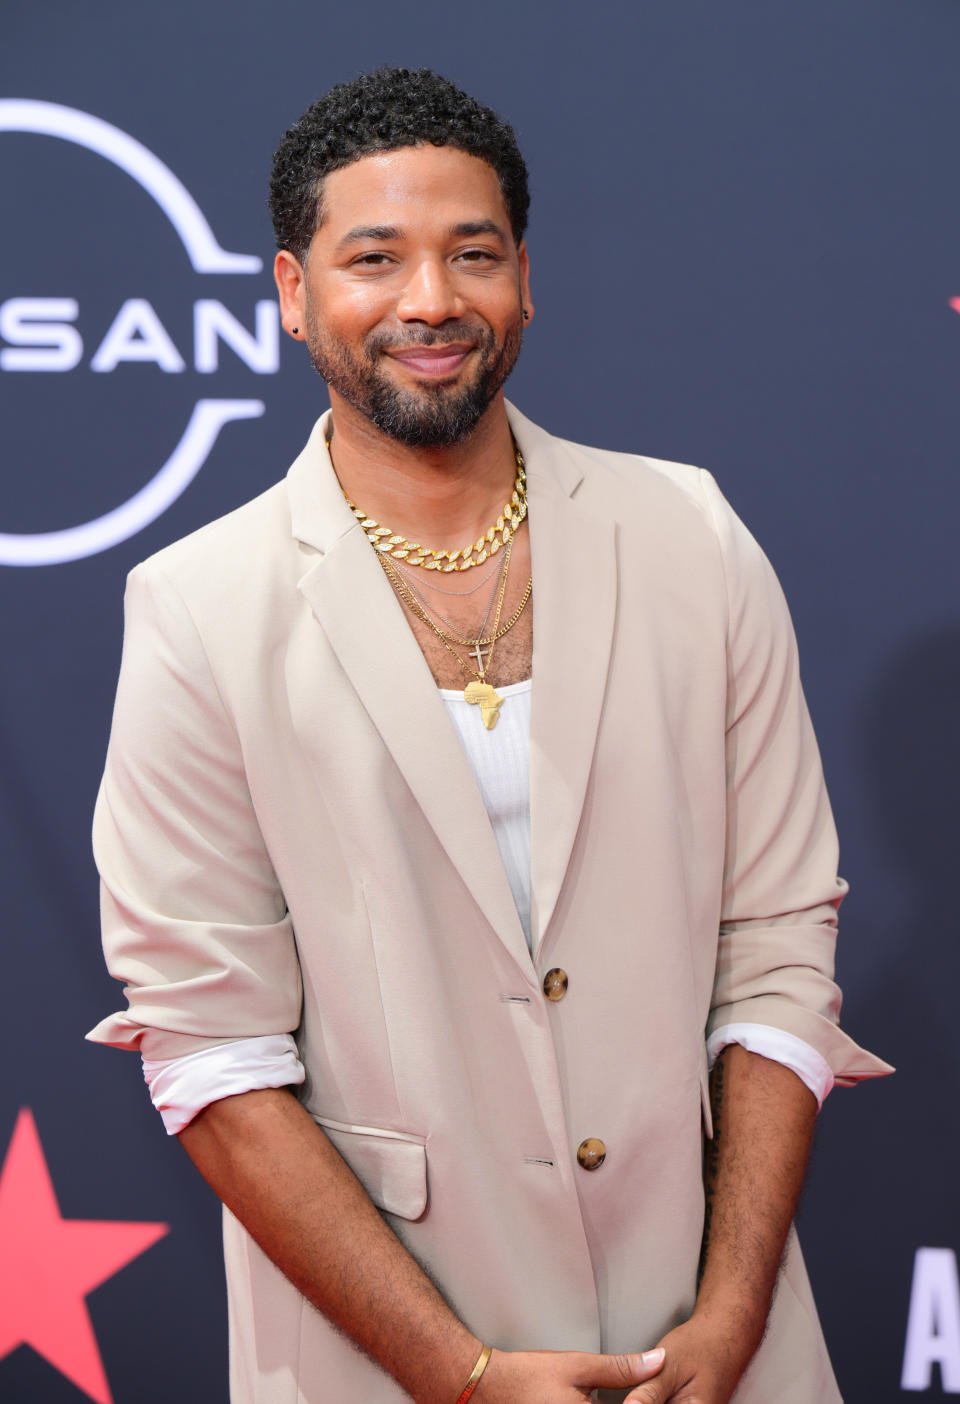 LOS ANGELES, CALIFORNIA - JUNE 26: Jussie Smollett attends the 2022 BET Awards at Microsoft Theater on June 26, 2022 in Los Angeles, California.  (Photo by Prince Williams/Getty Images)